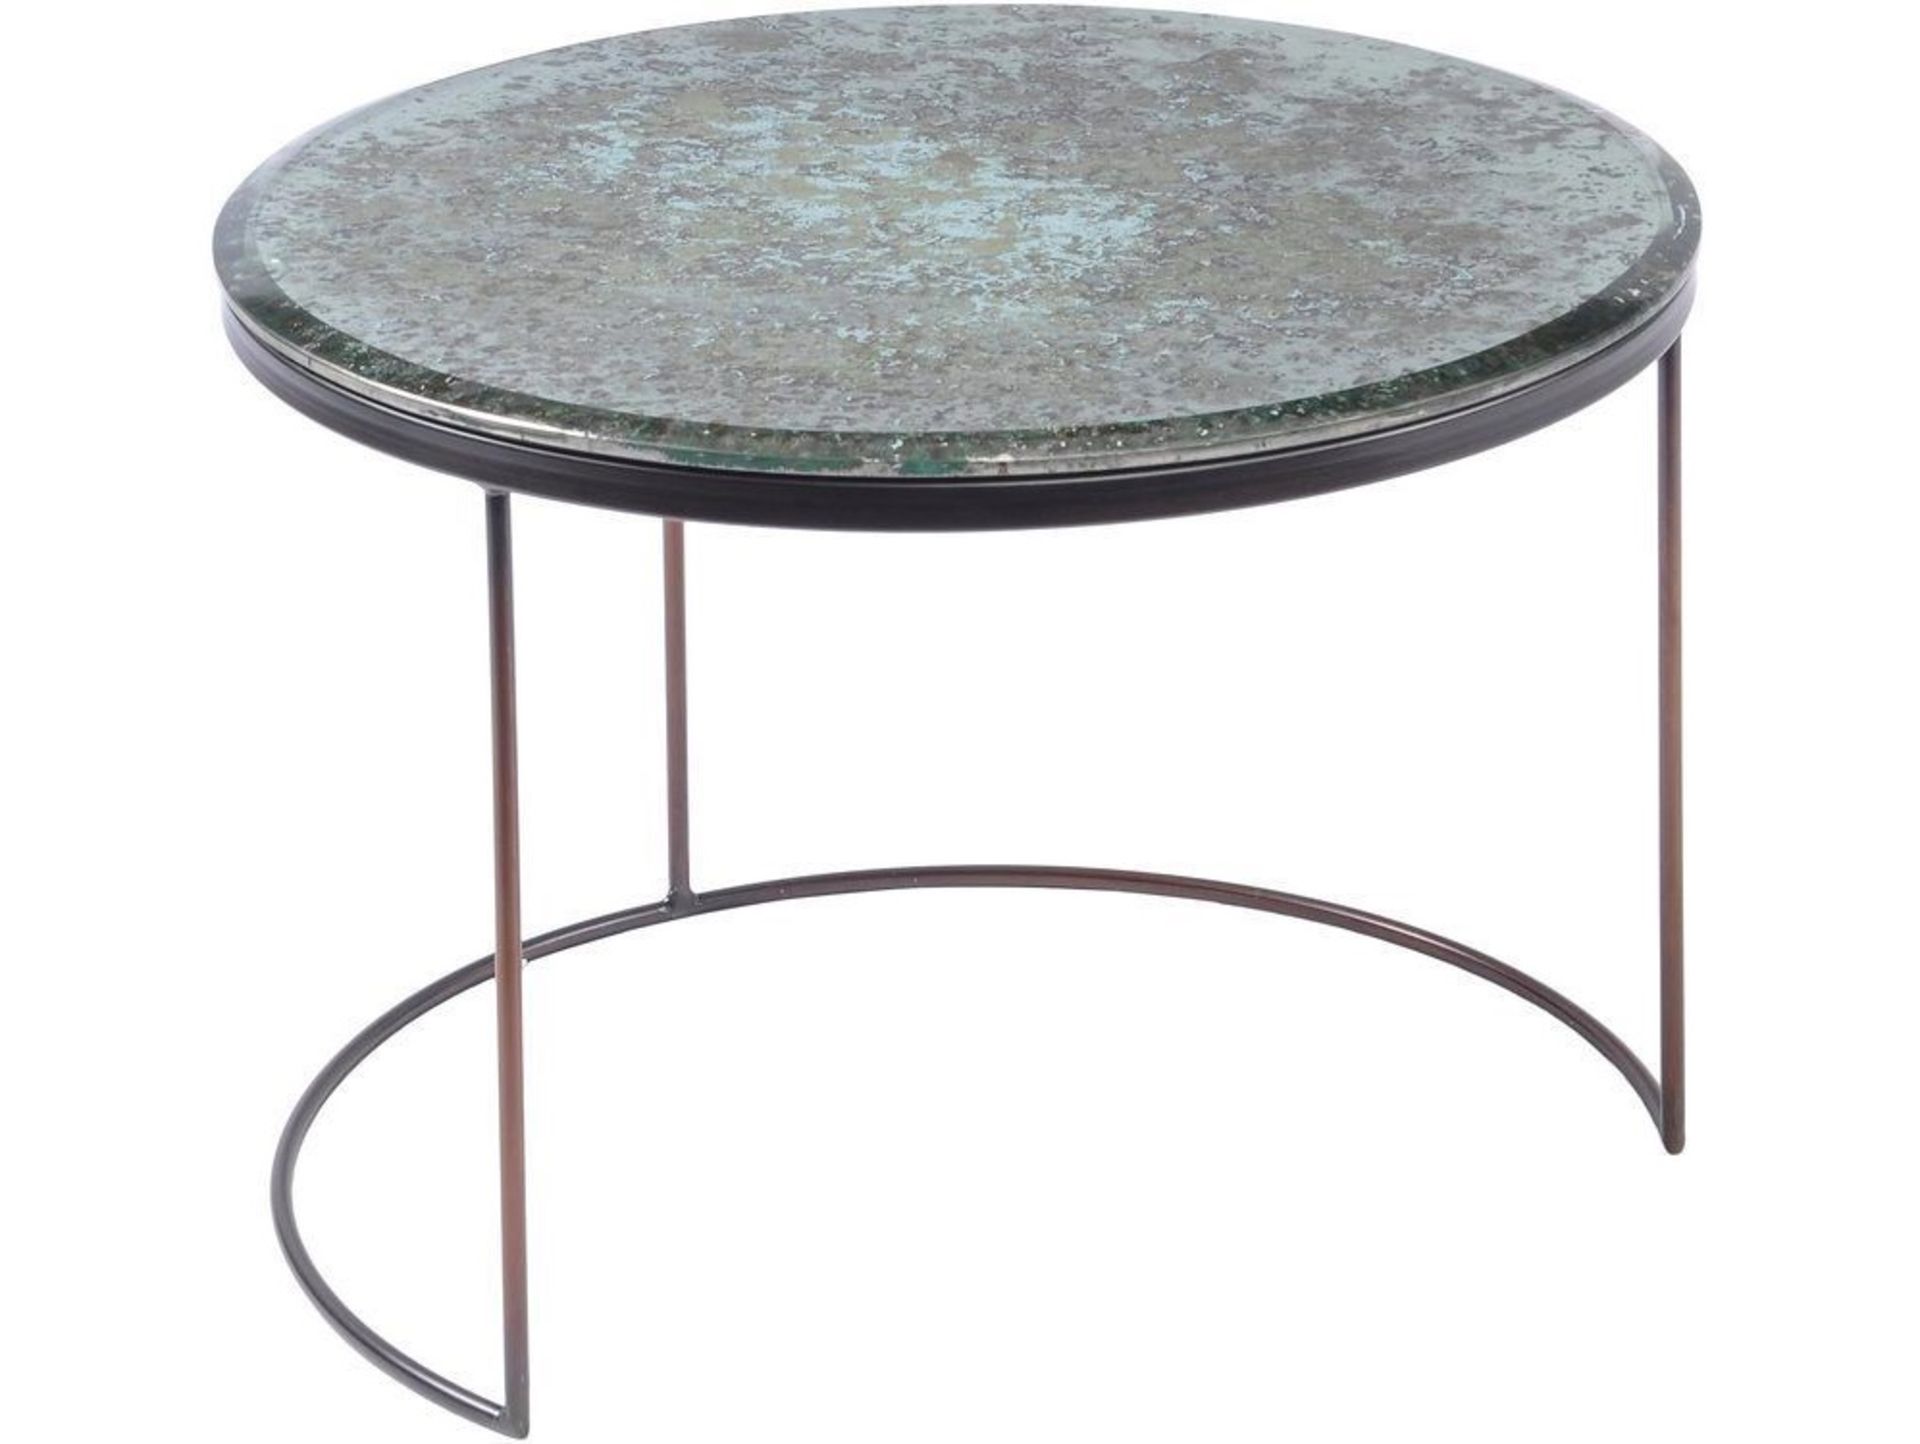 Vitrio Mottled Glass Top Coffee Table This stunning little turquoise table will be the centre of